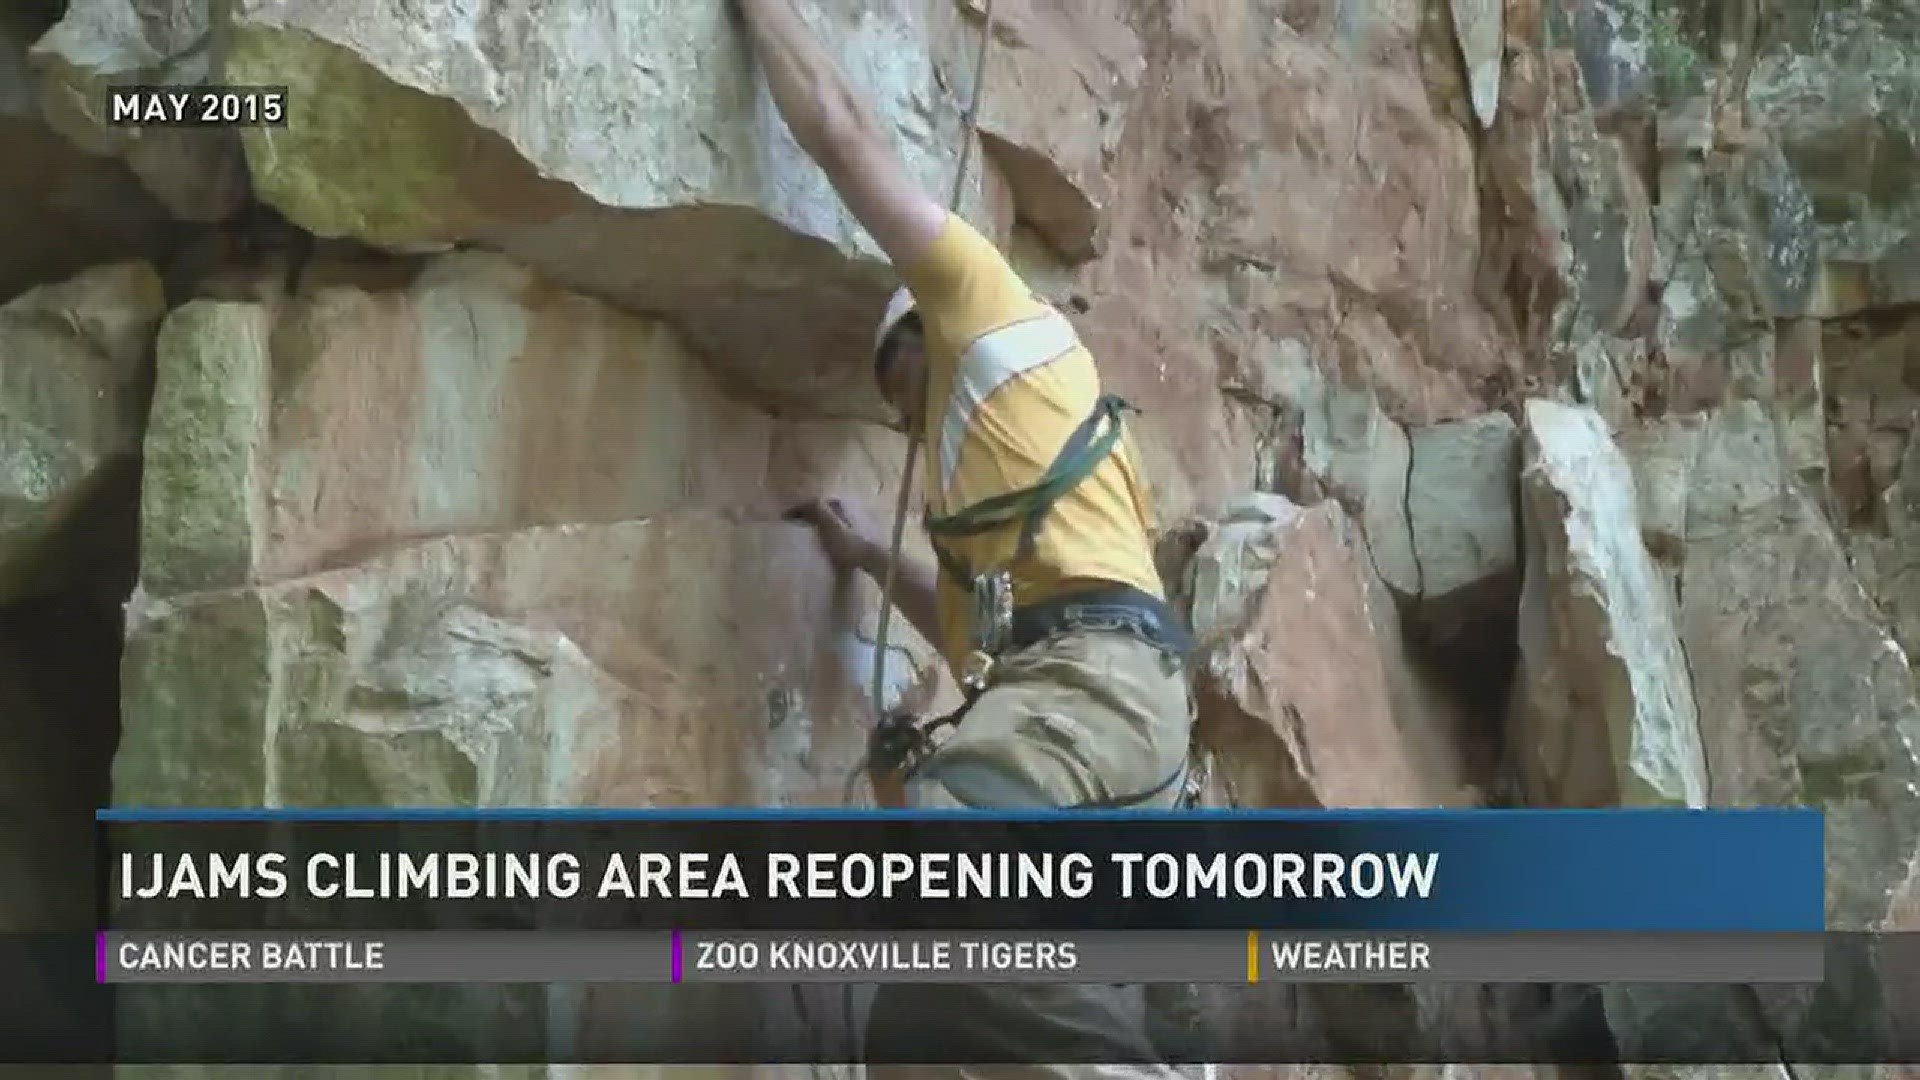 April 7, 2017: A popular outdoor rock climbing area at Ijams Nature Center is reopening to the public.